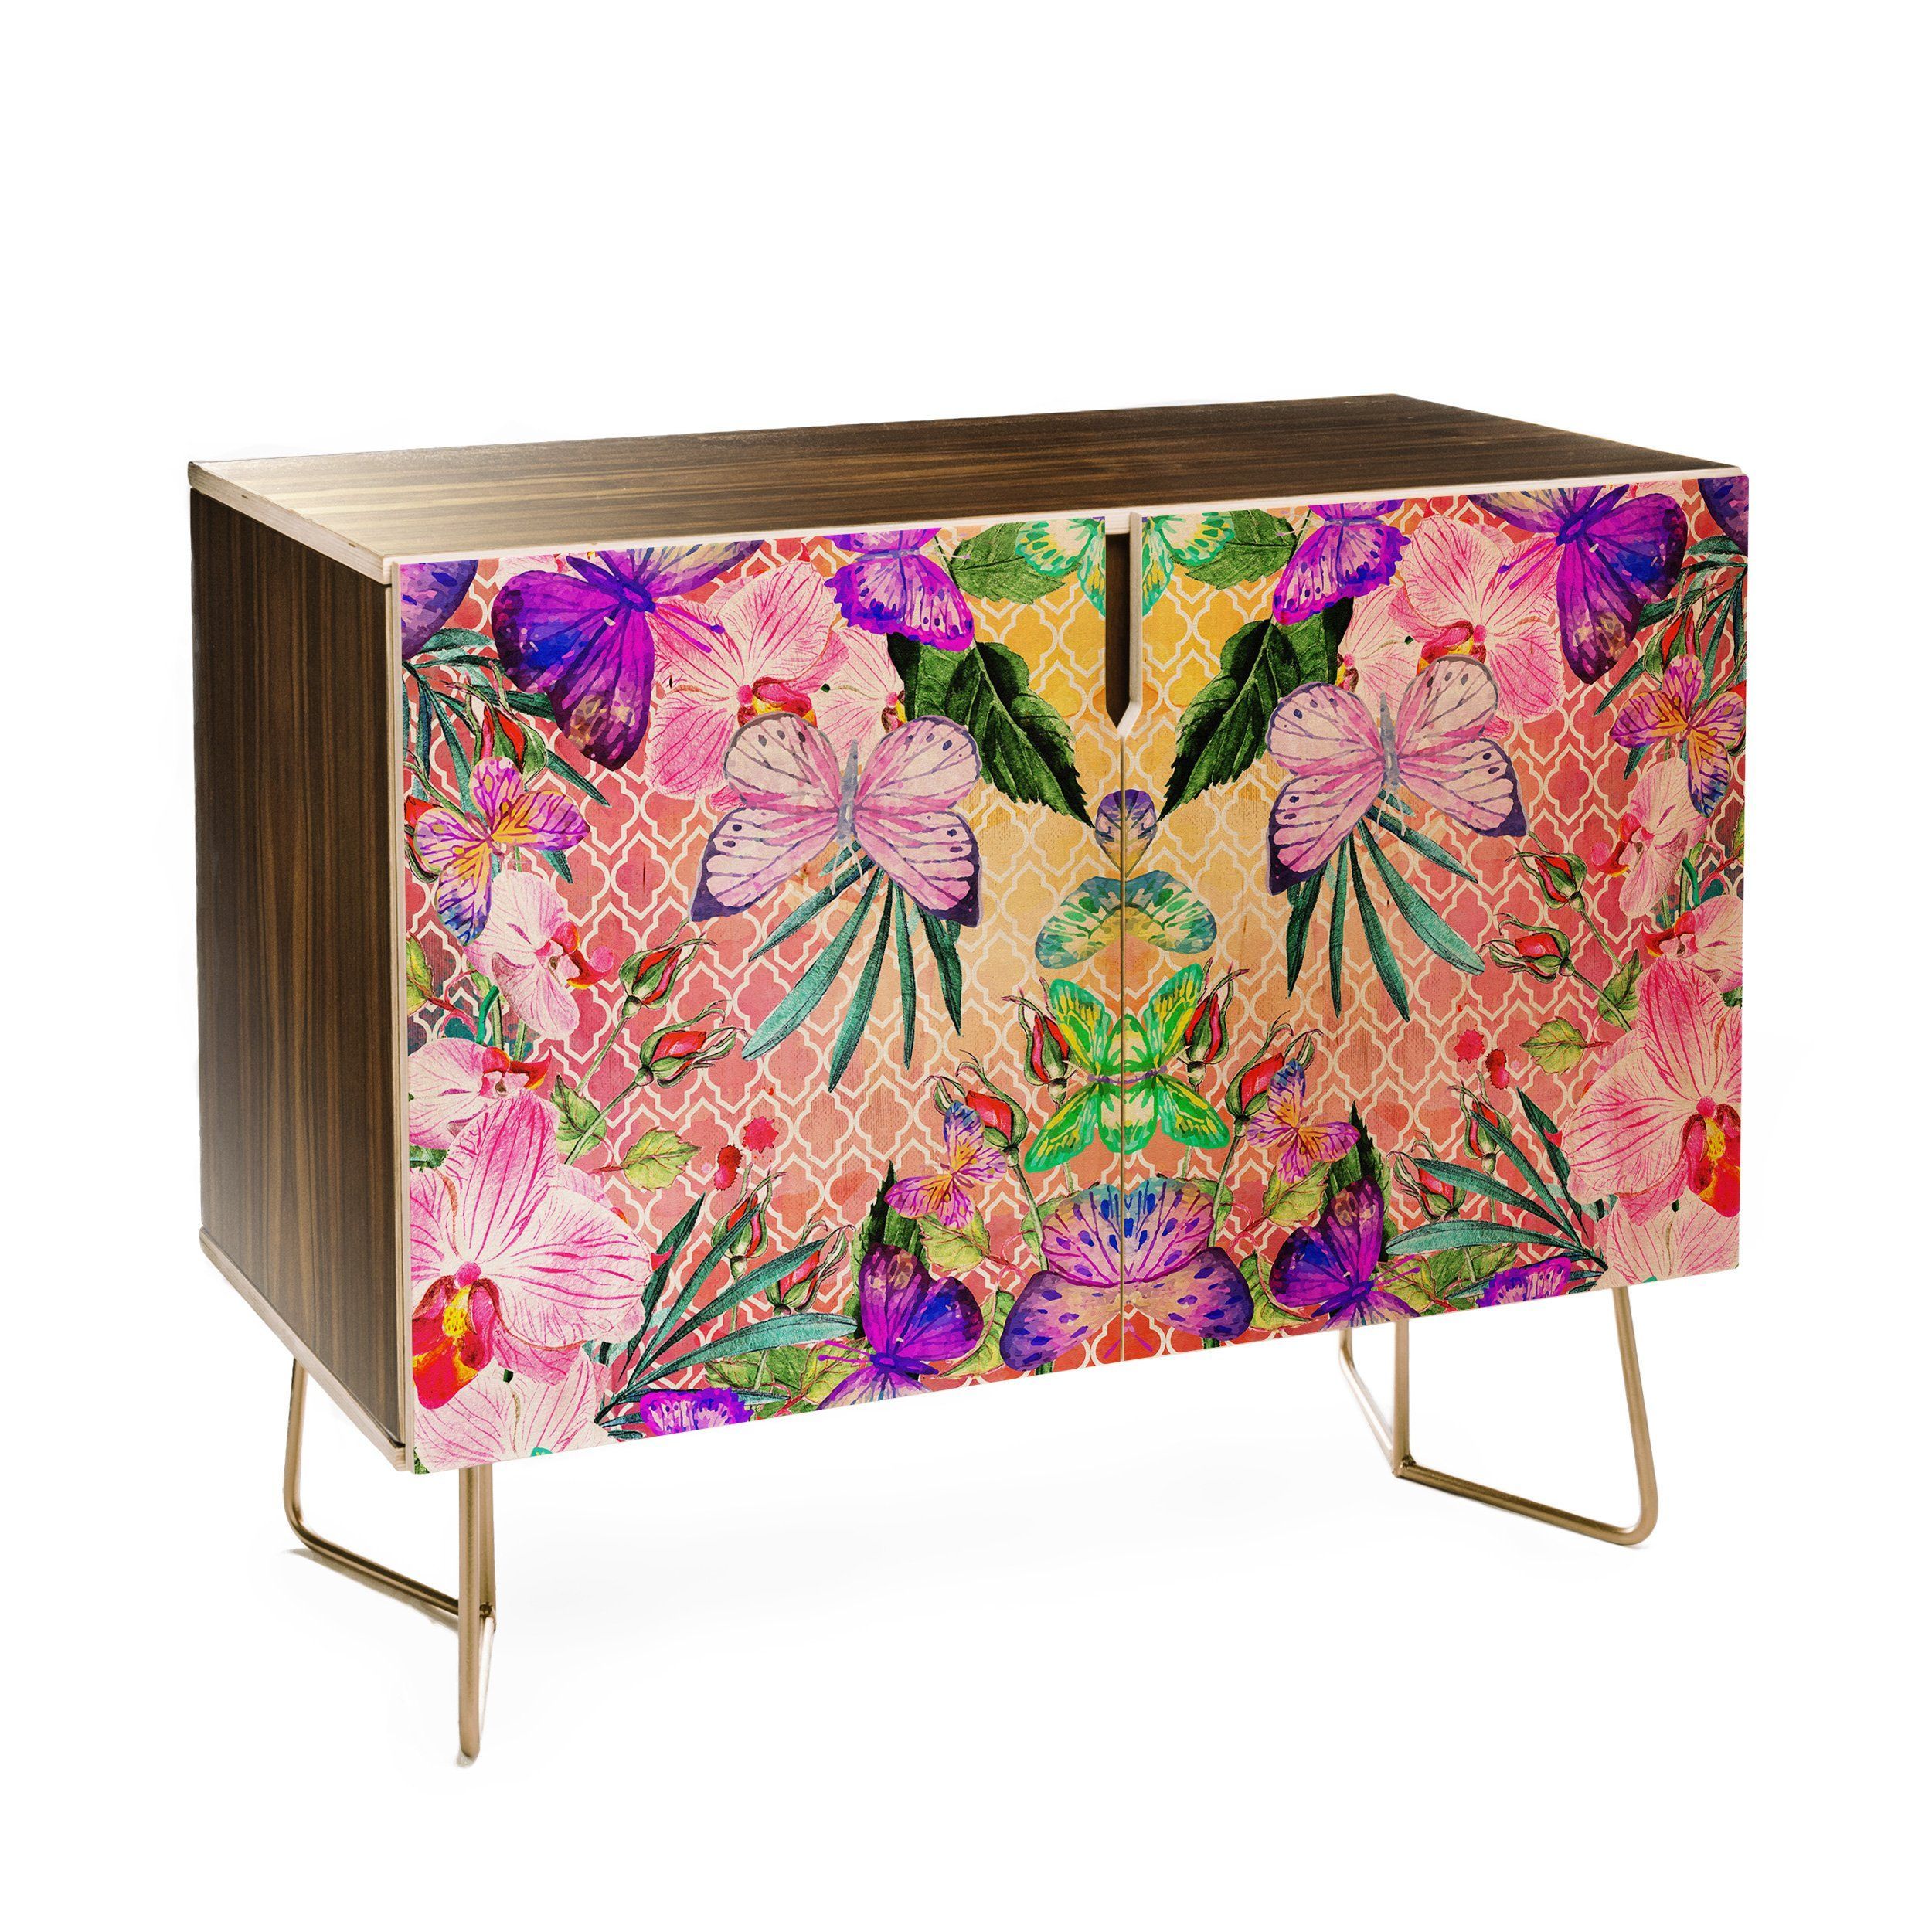 Marta Barragan Camarasa Mosaic Of Nature And Butterflies Throughout Purple Floral Credenzas (View 9 of 30)